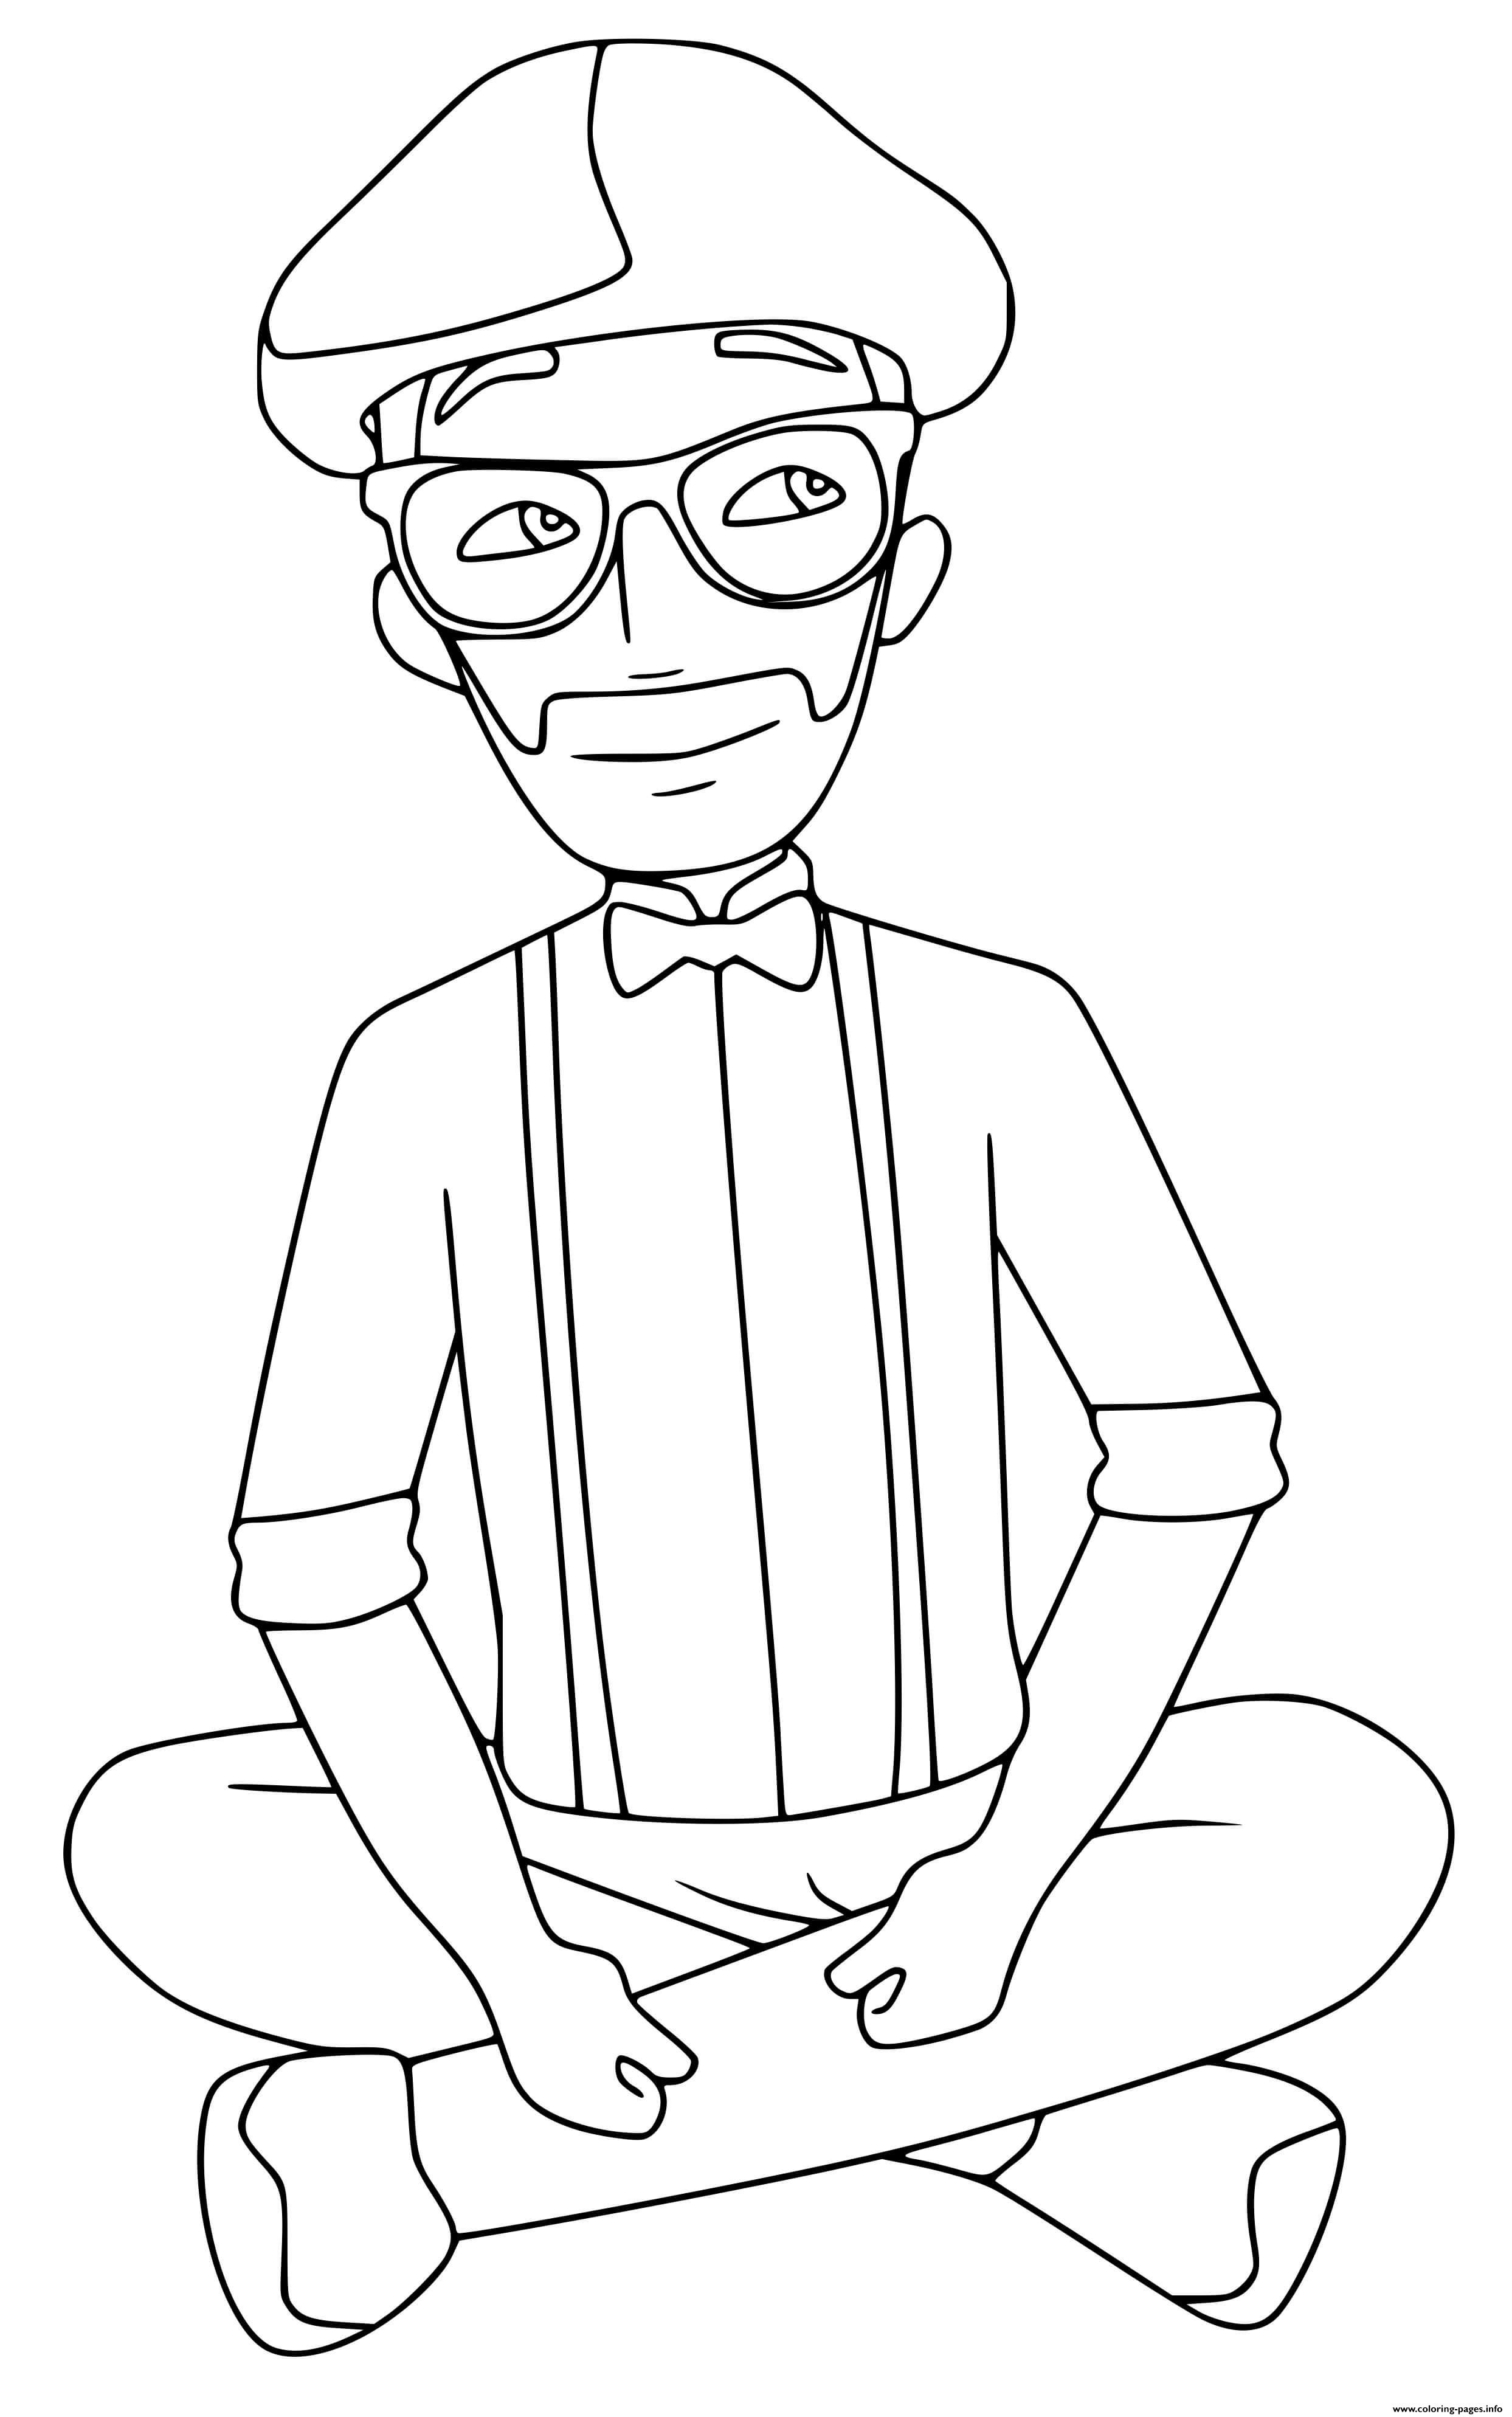 blippi-printable-coloring-pages-printable-blog-calendar-here